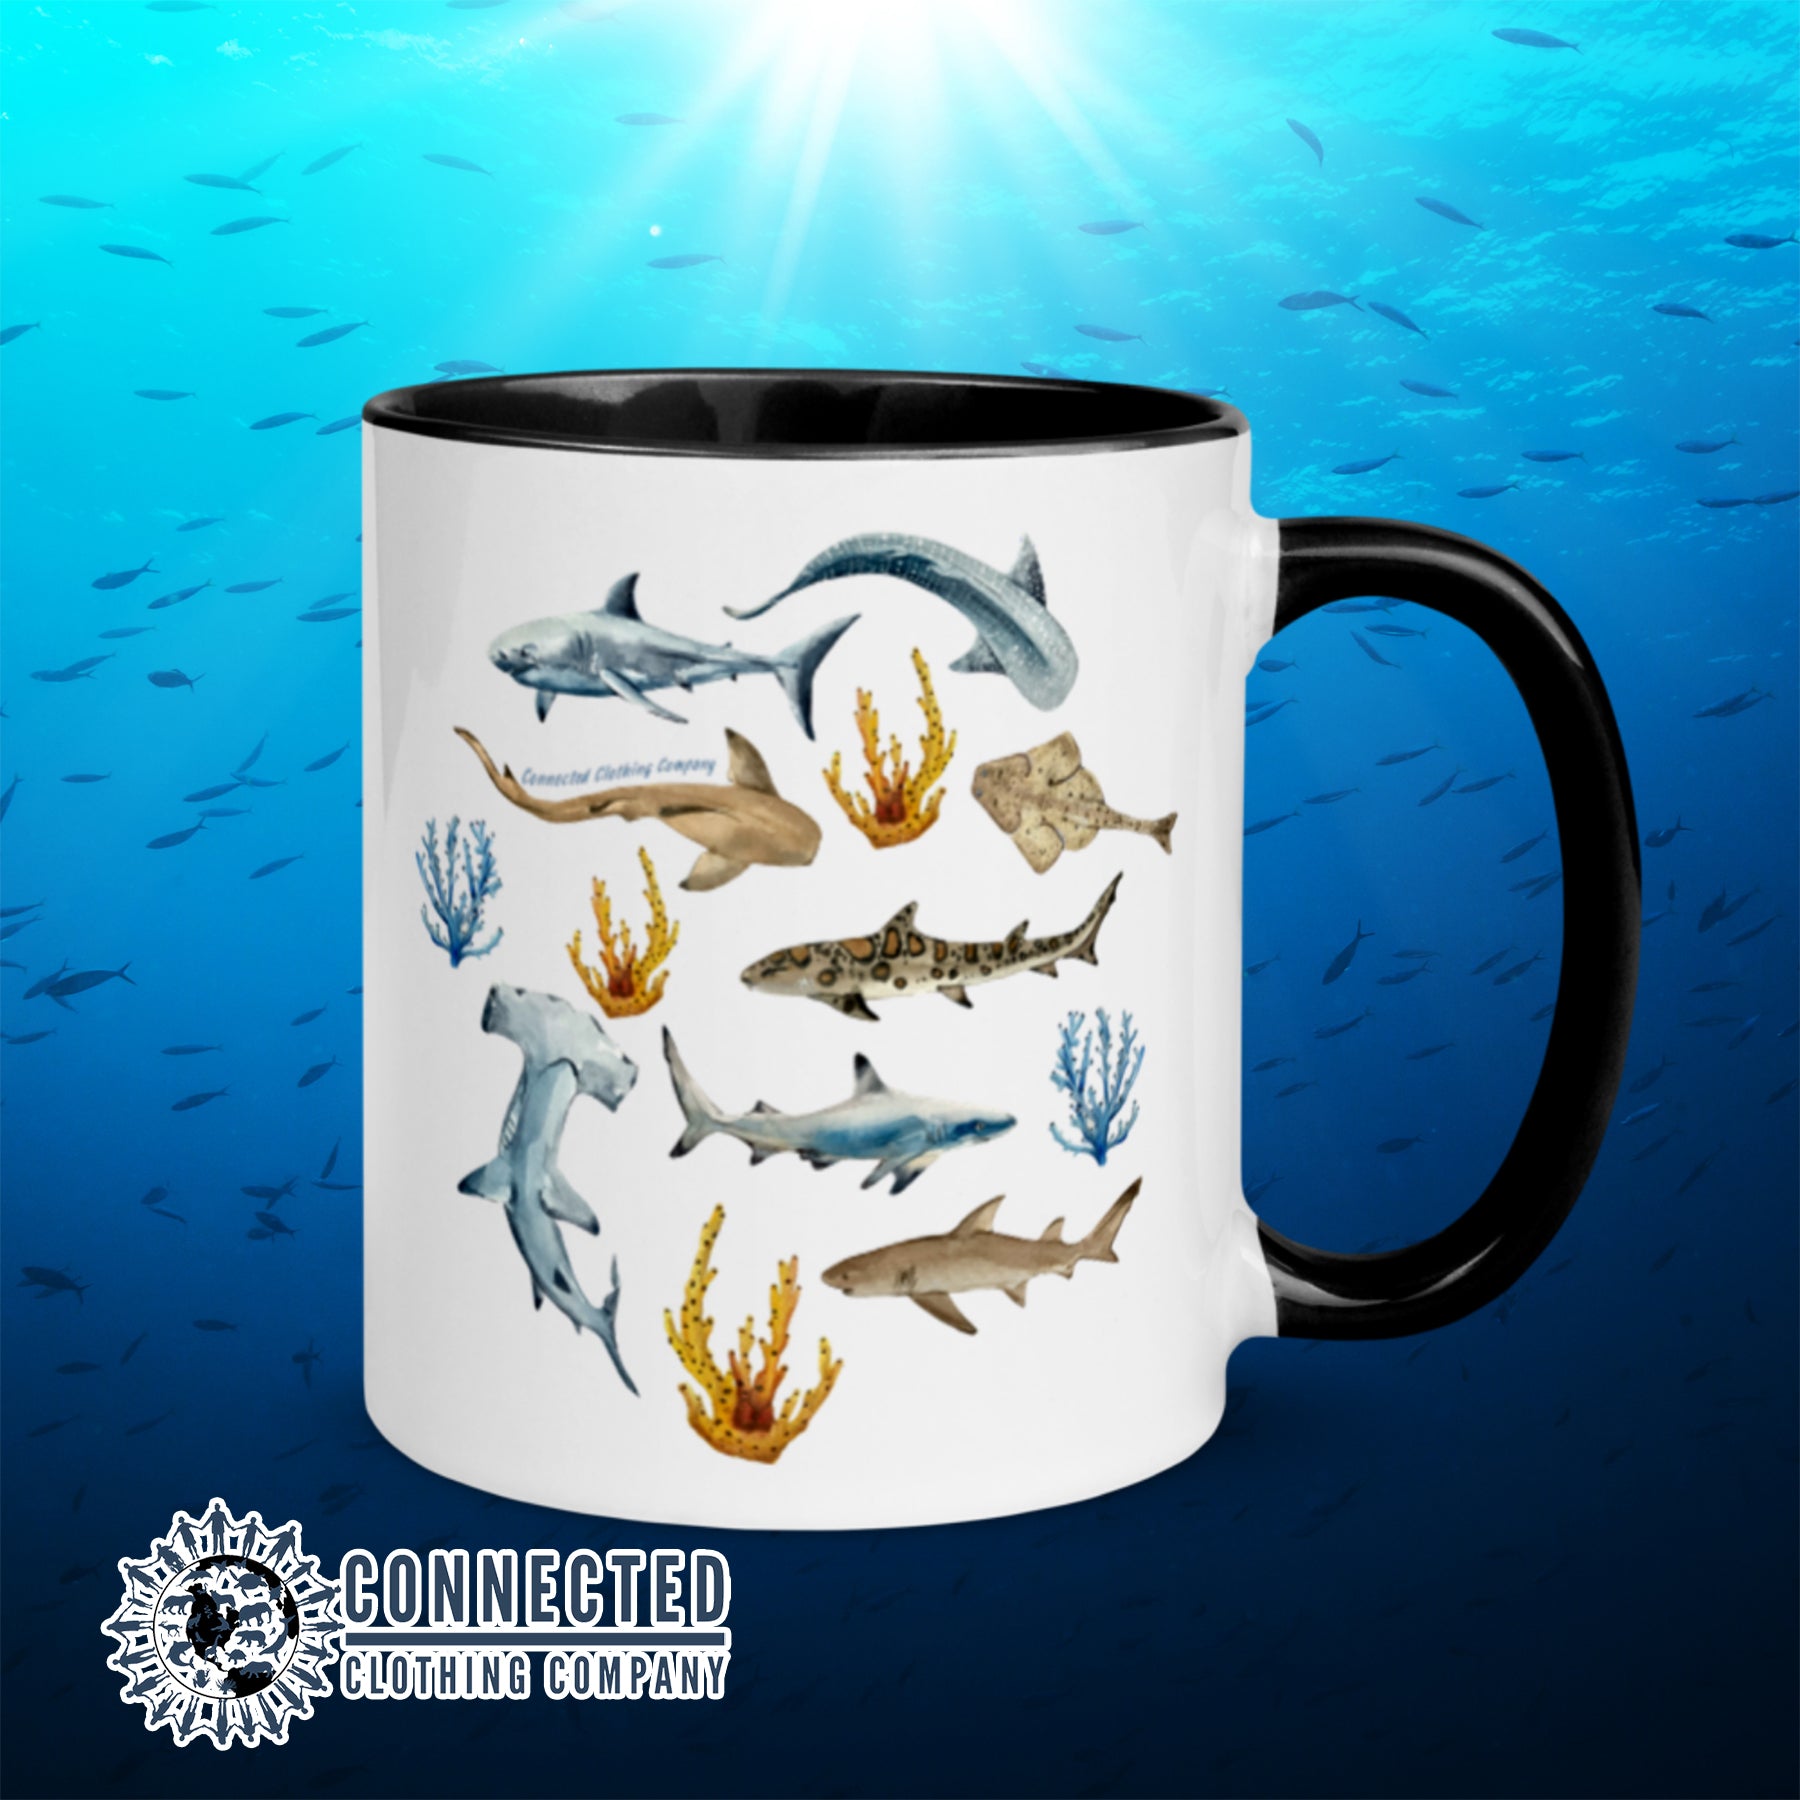 Shark Ocean Watercolor Colored Mug With Black Coloring on Inside, Rim, and Handle - Connected Clothing Company - Ethically and Sustainably Made - 10% donated to Oceana shark conservation